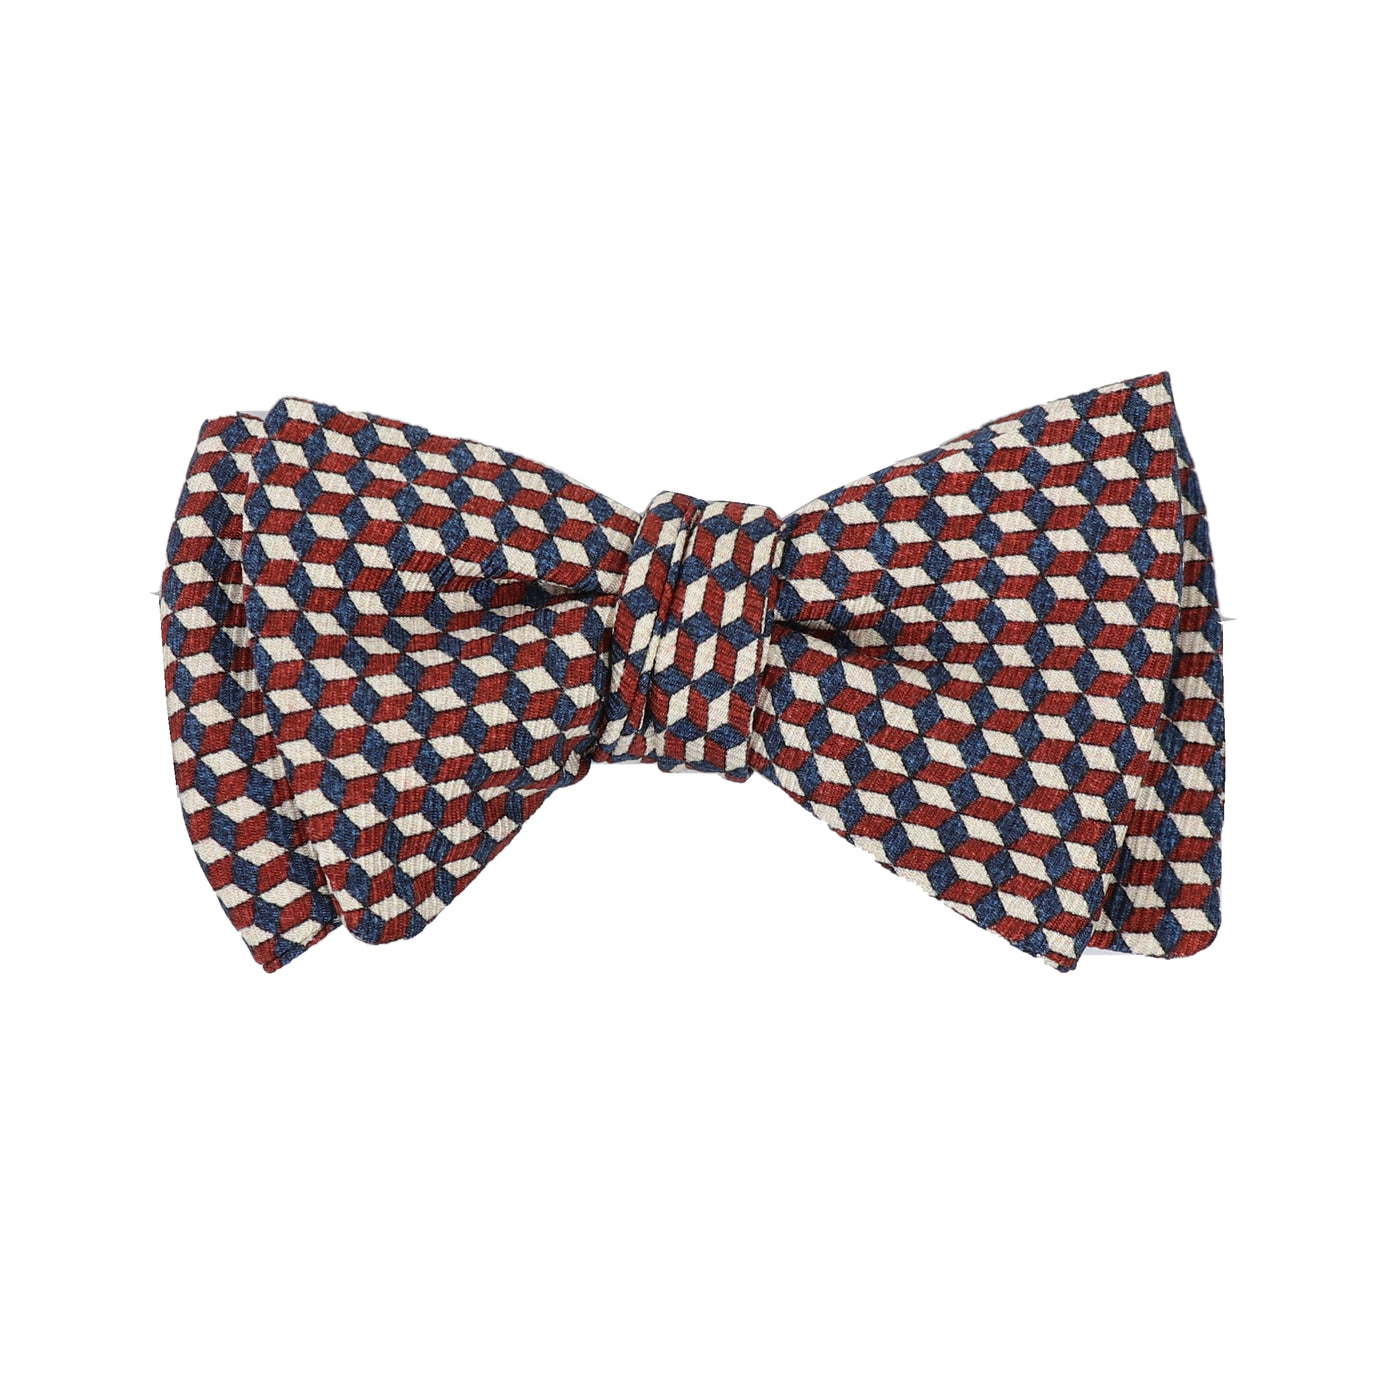 Geo Boxes Bow Tie in Red, White, & Blue